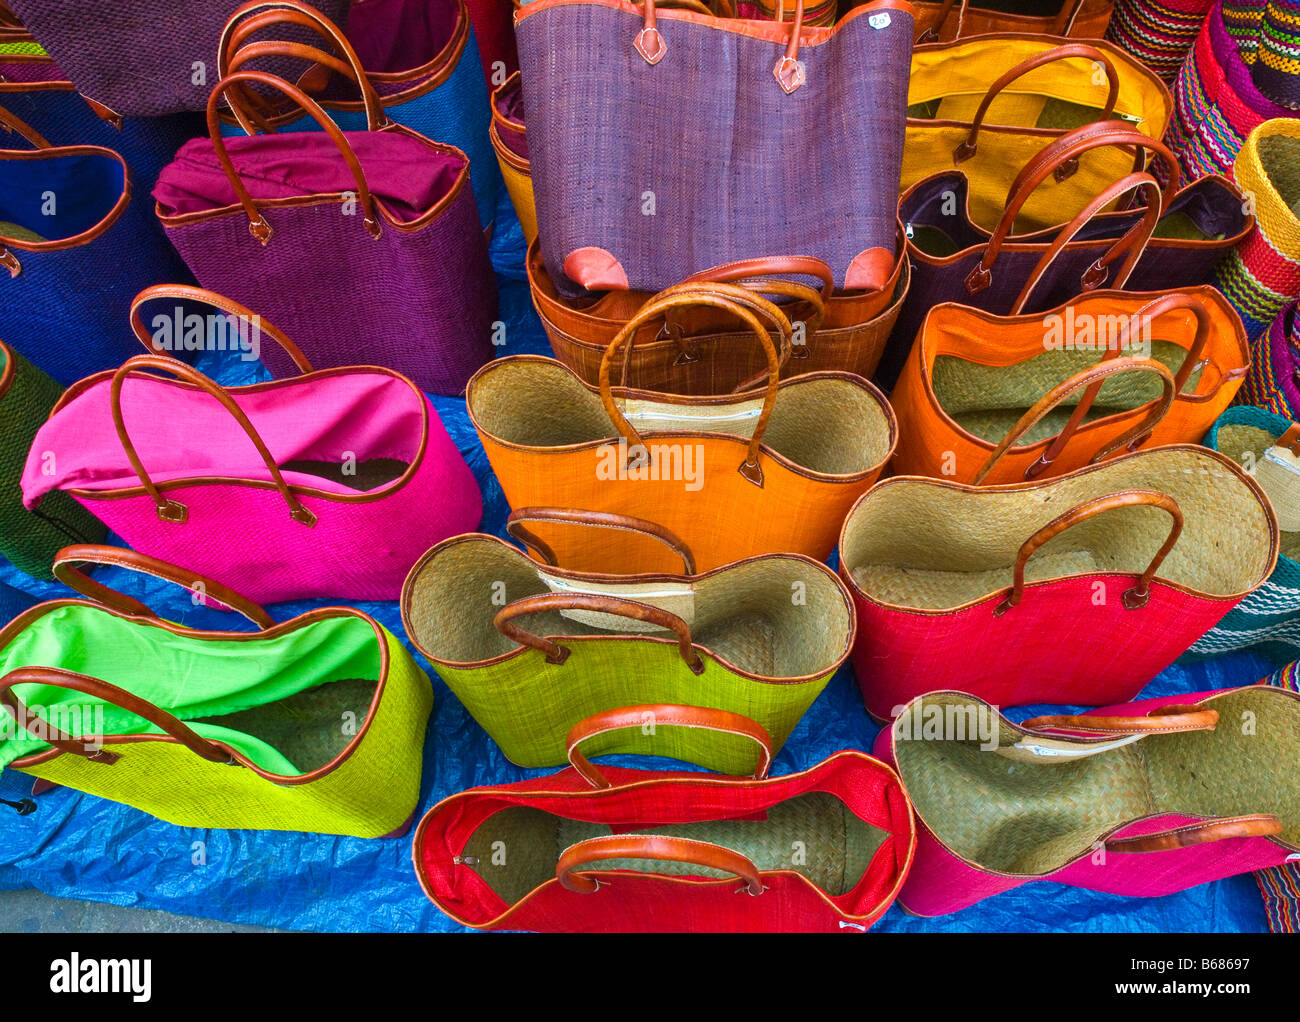 brightly coloured shopping bags on display at a marker stall in Sarlat France Stock Photo